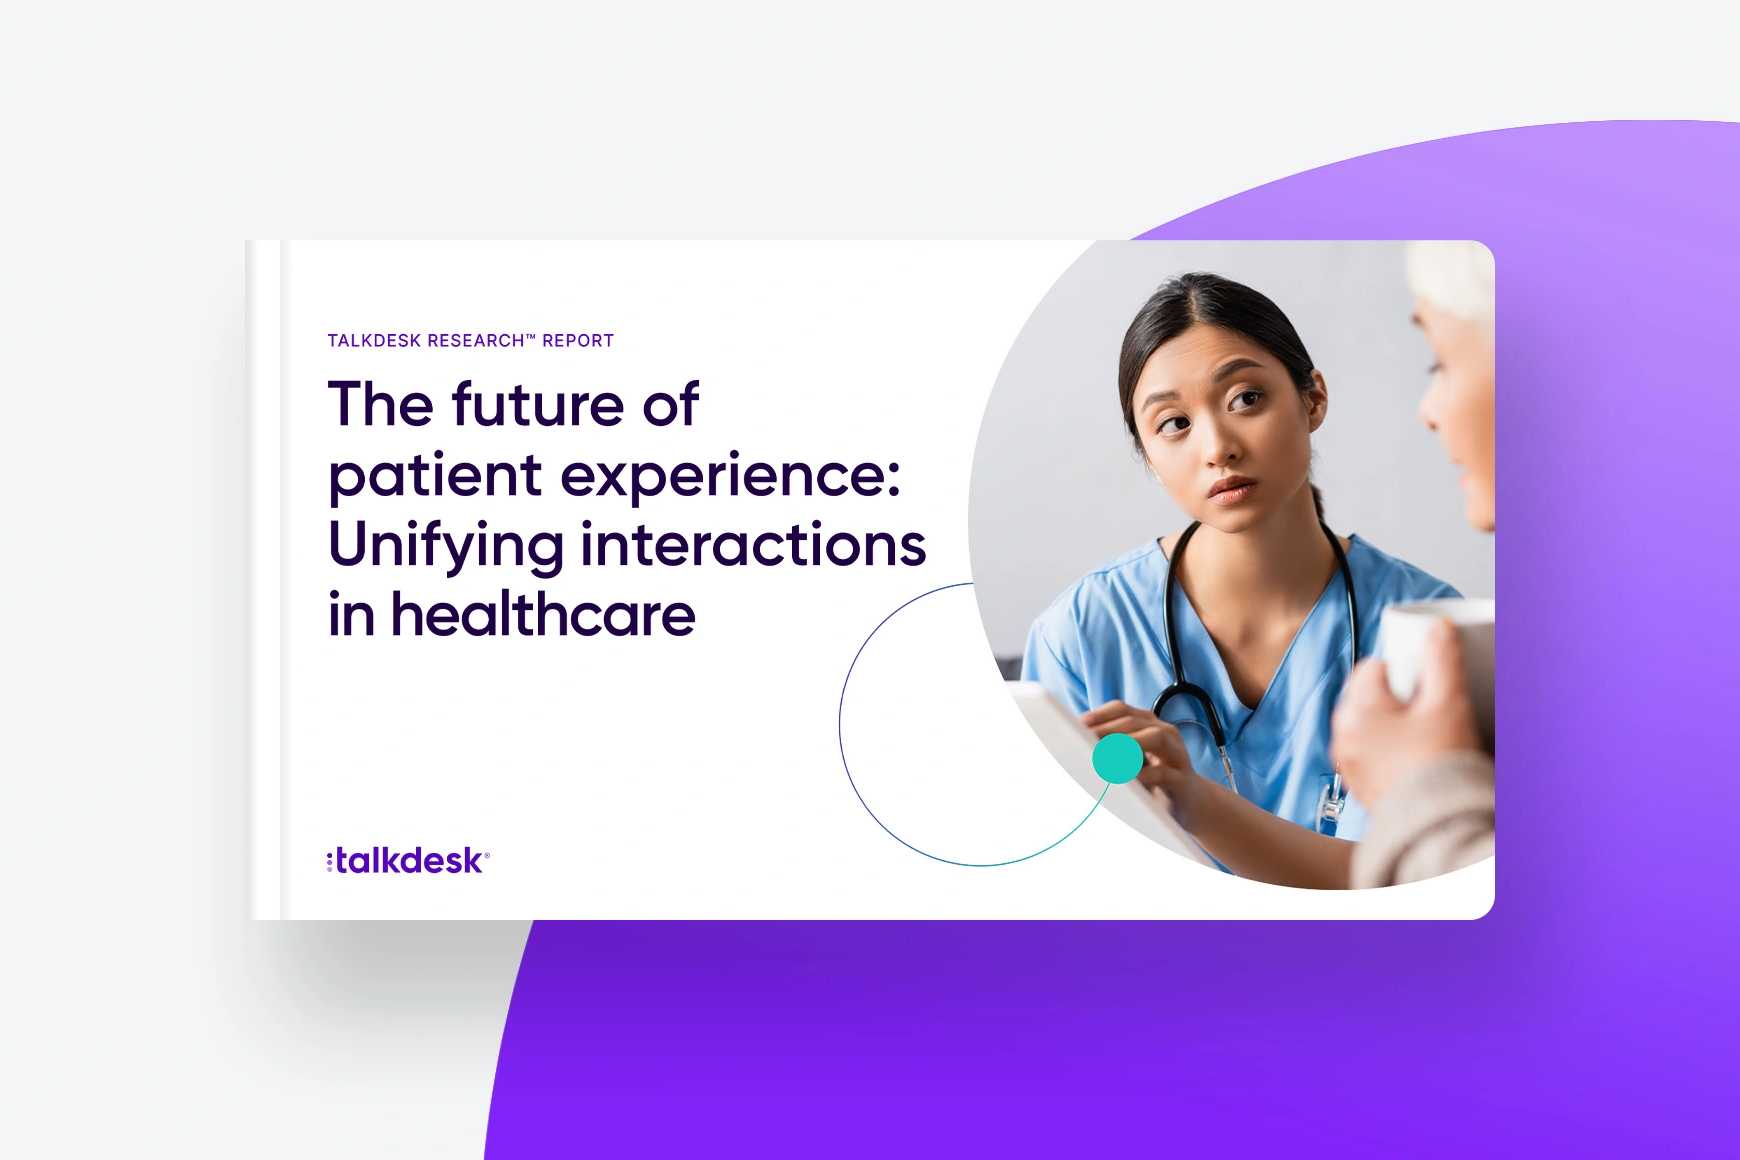 The future of patient experience: Unifying interactions in healthcare